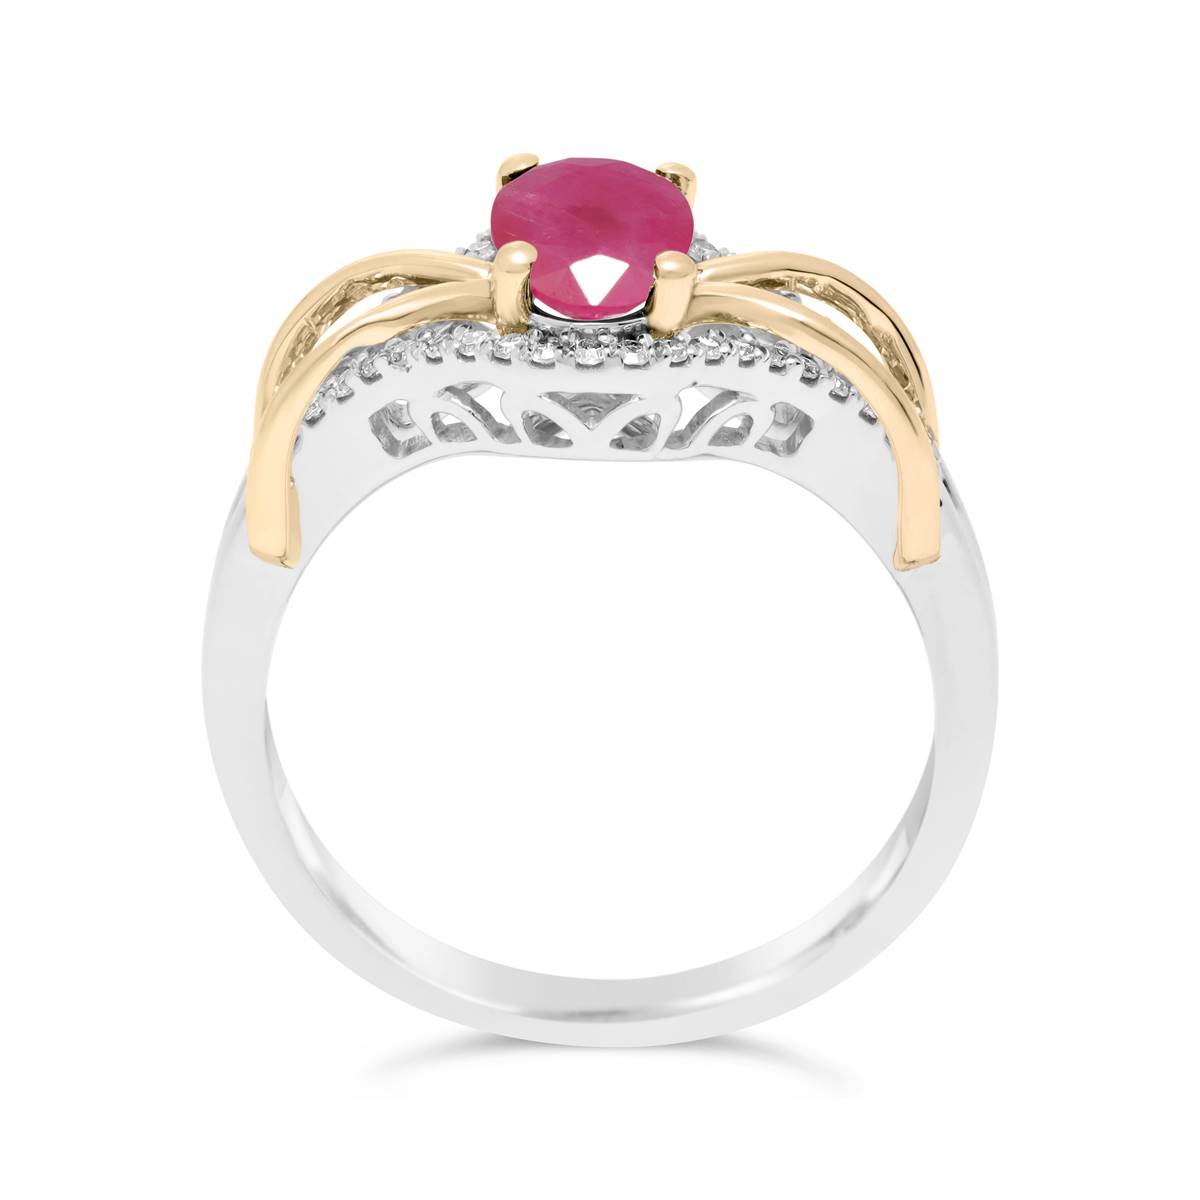 10kt. Two-Tone Gold Oval Ruby Ring